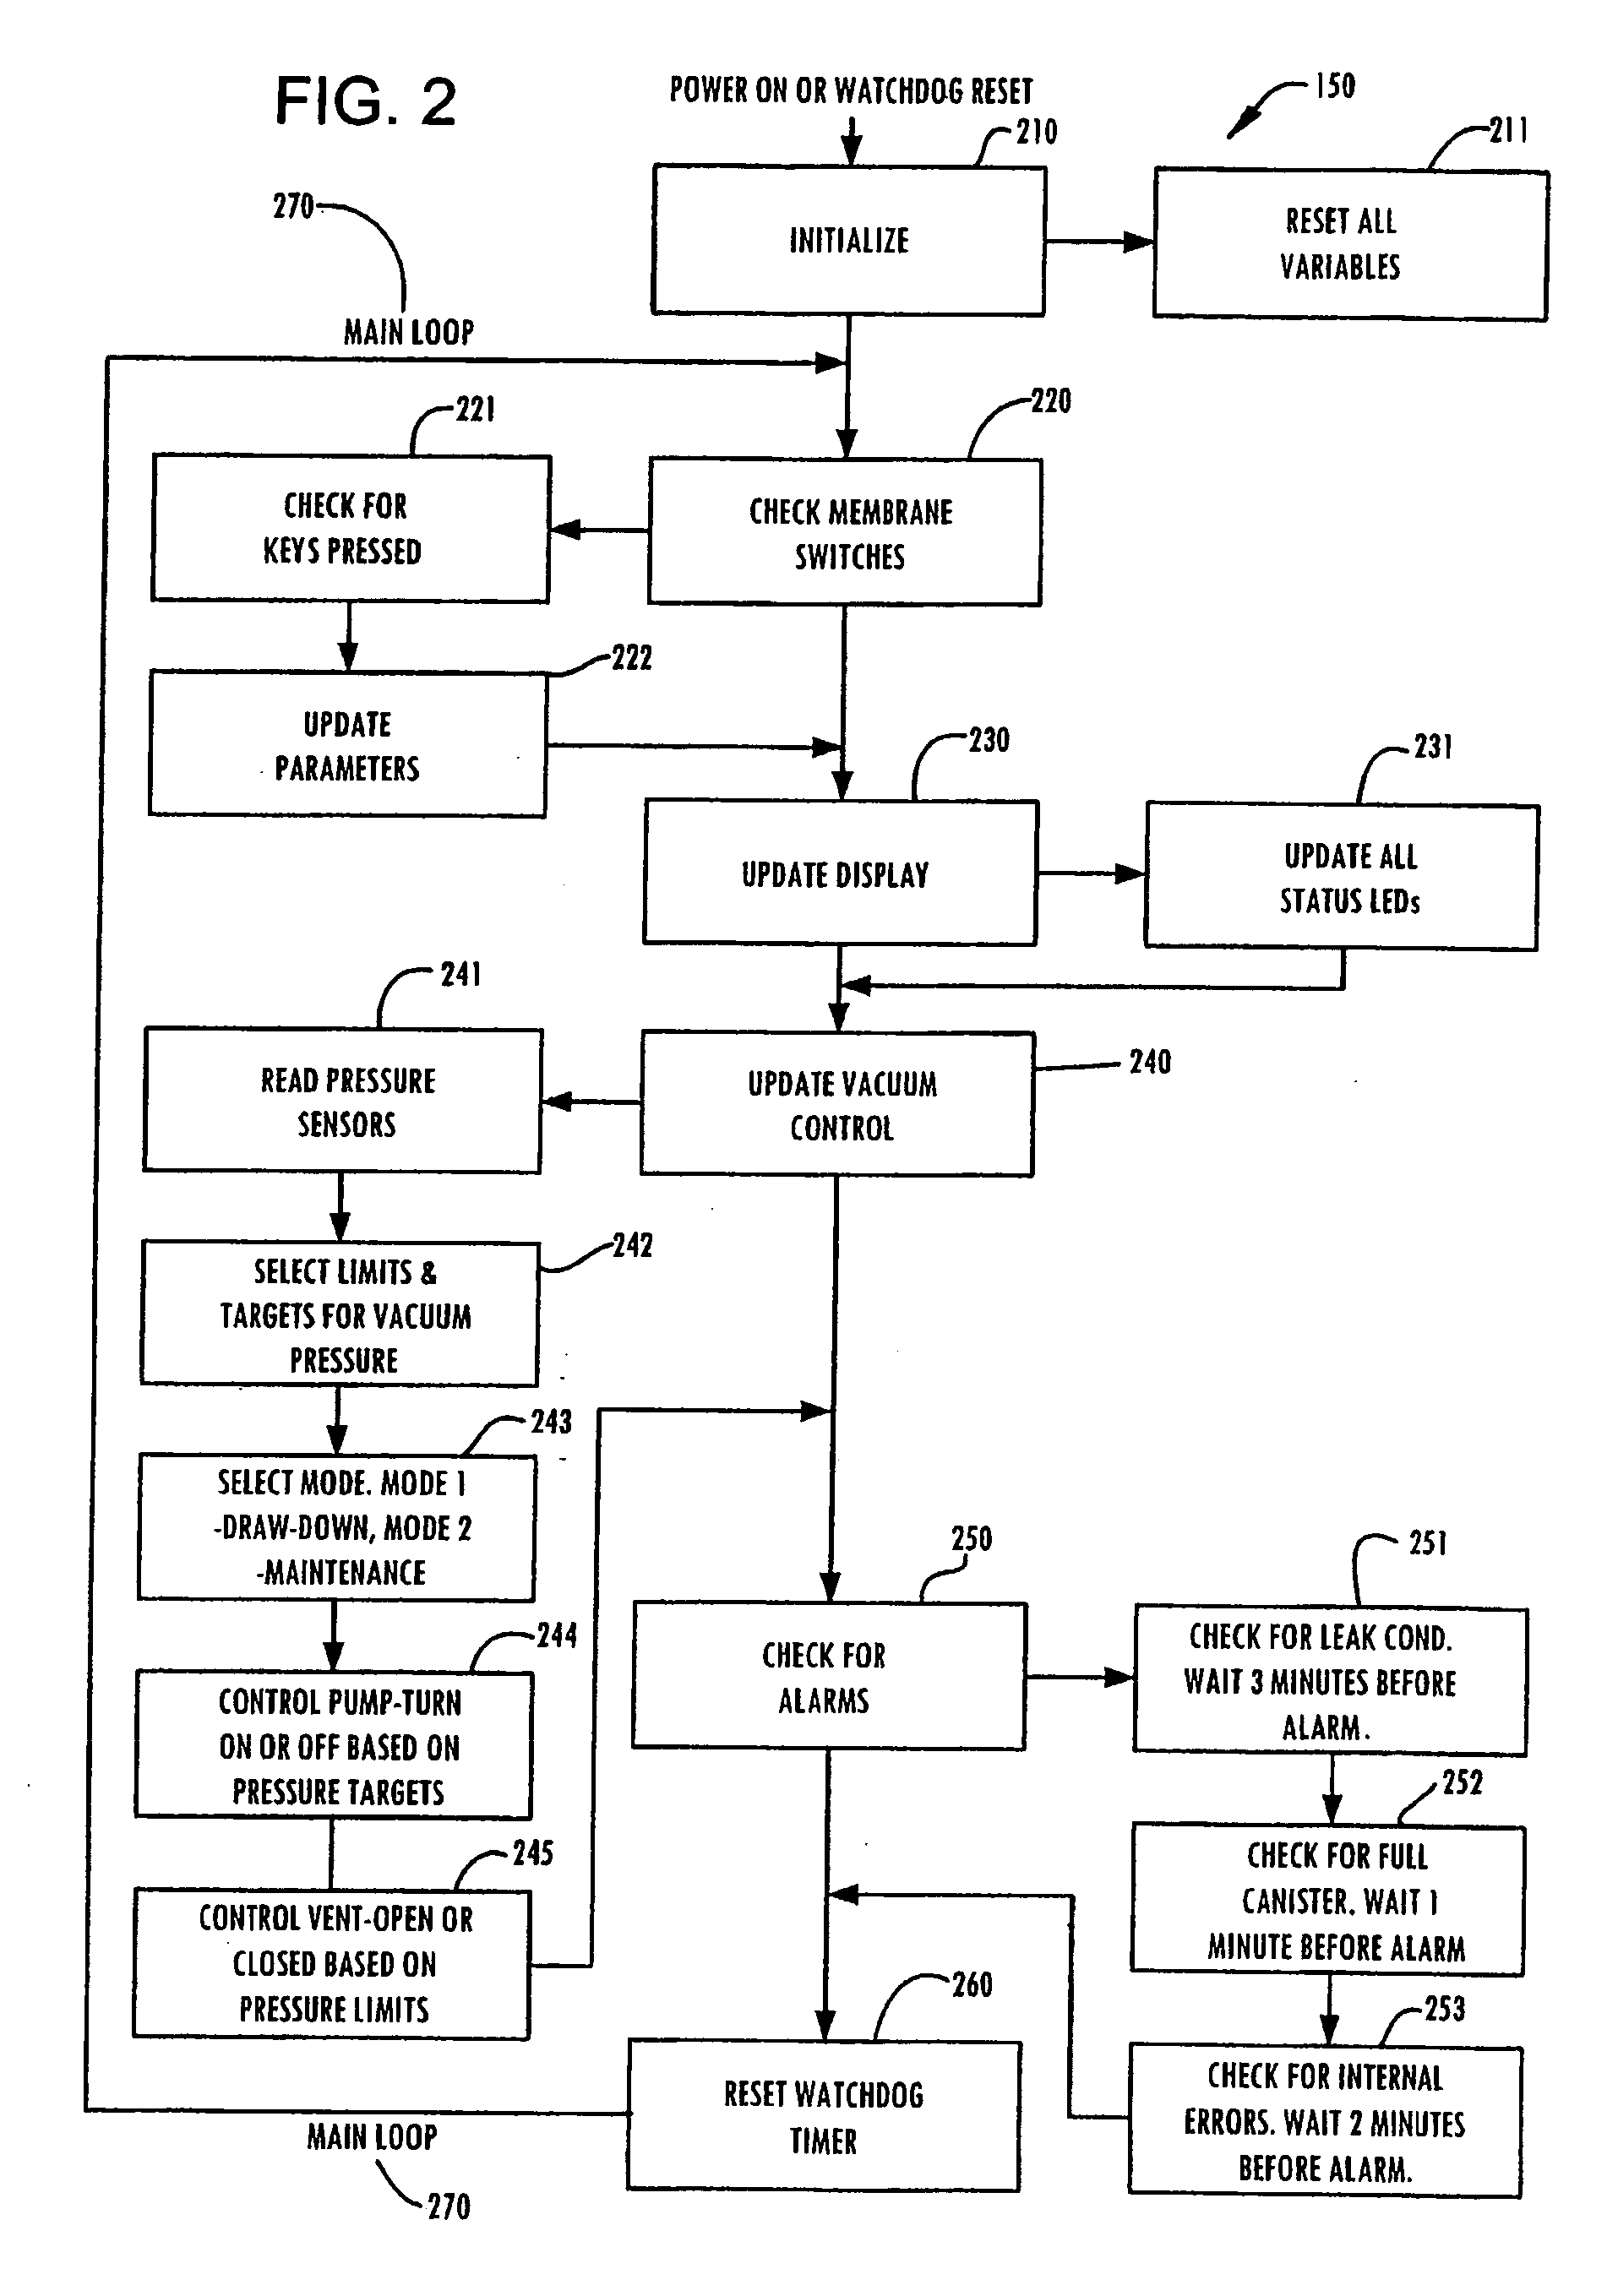 Wound irrigation device pressure monitoring and control system